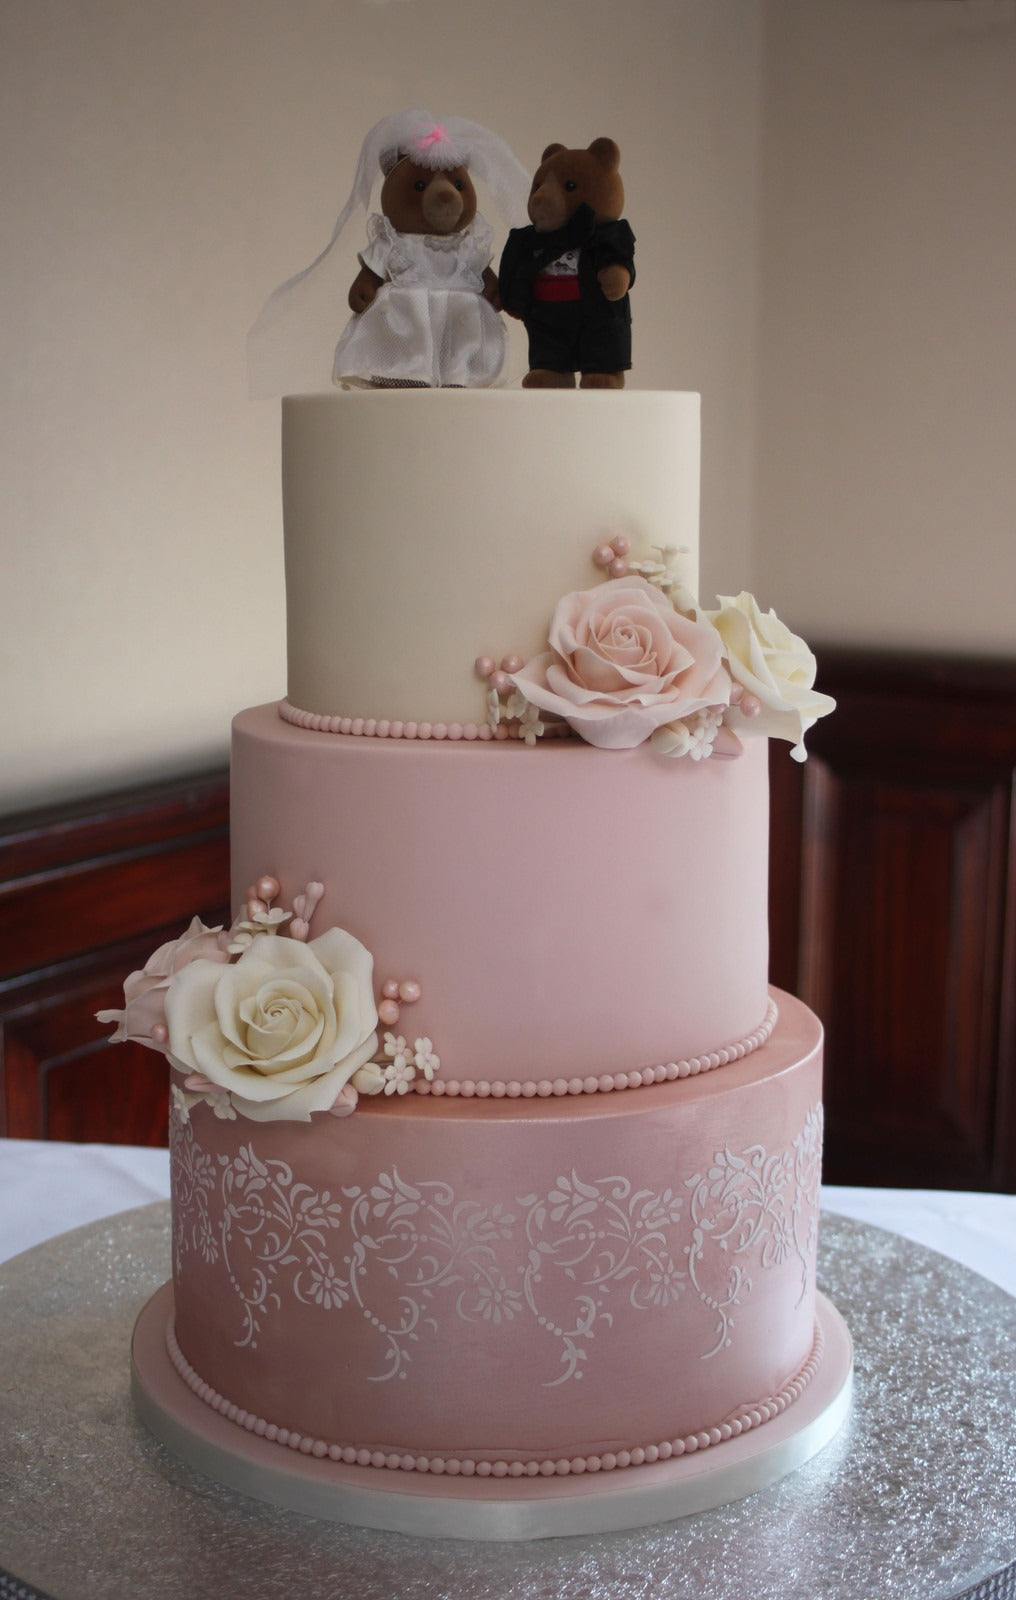 3 Tier Wedding Cake with Ivory and Pink Sugar Roses | Doon Memories